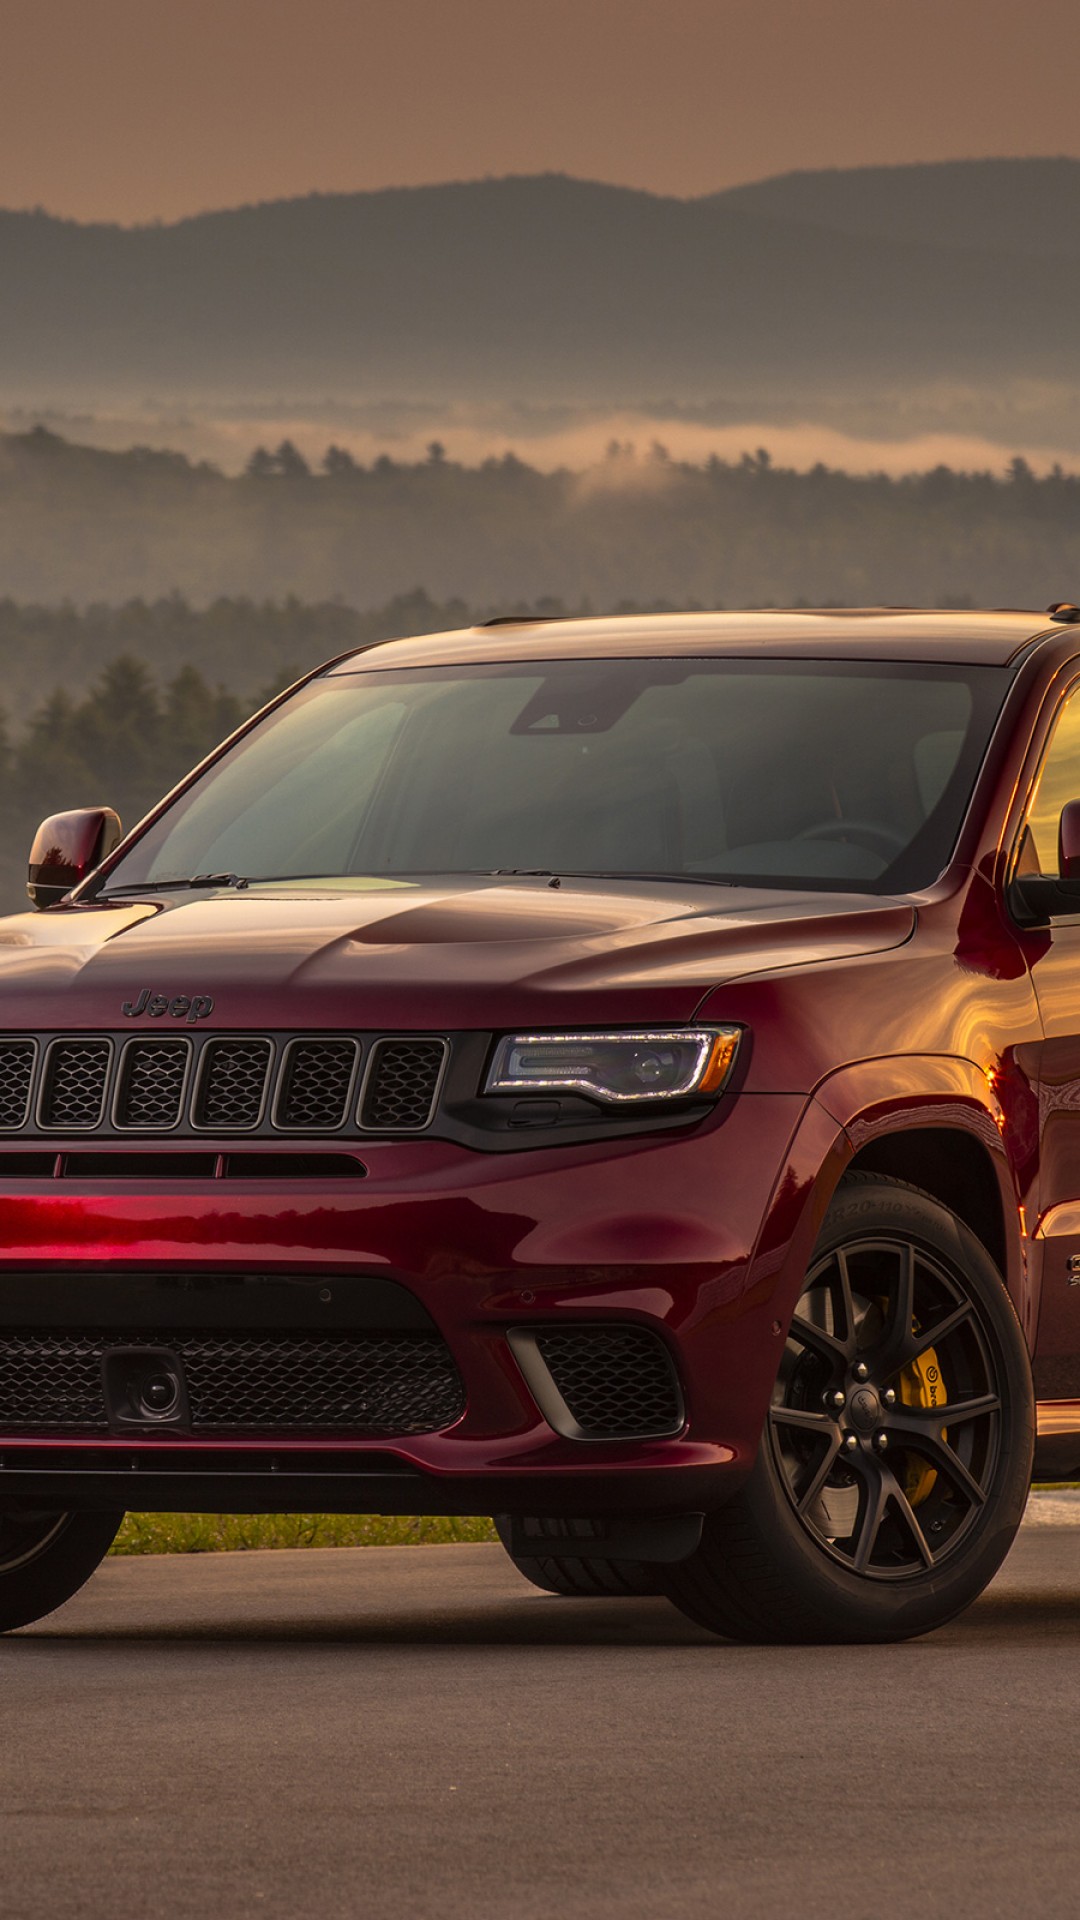 Featured image of post Jeep Srt Wallpaper : Feel free to send us your own wallpaper and we will consider adding it to appropriate category.